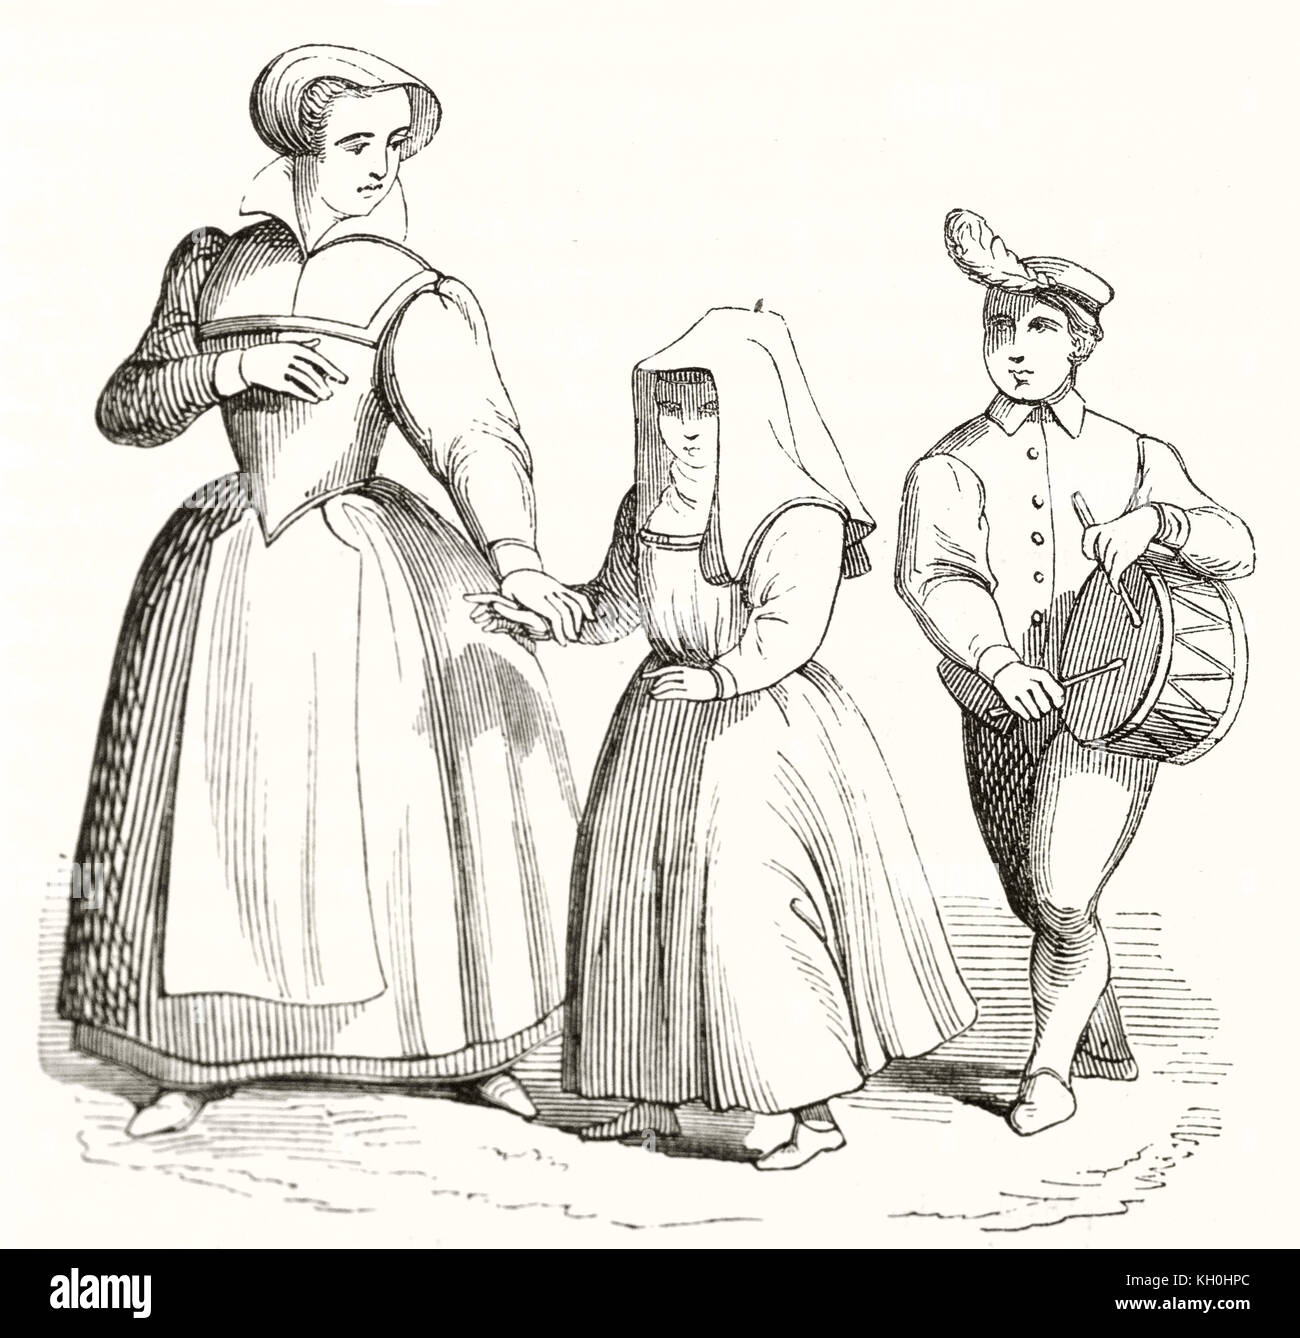 Old illustration of woman and children. By unidentified author, publ. on Magasin Pittoresque, Paris, 1847 Stock Photo